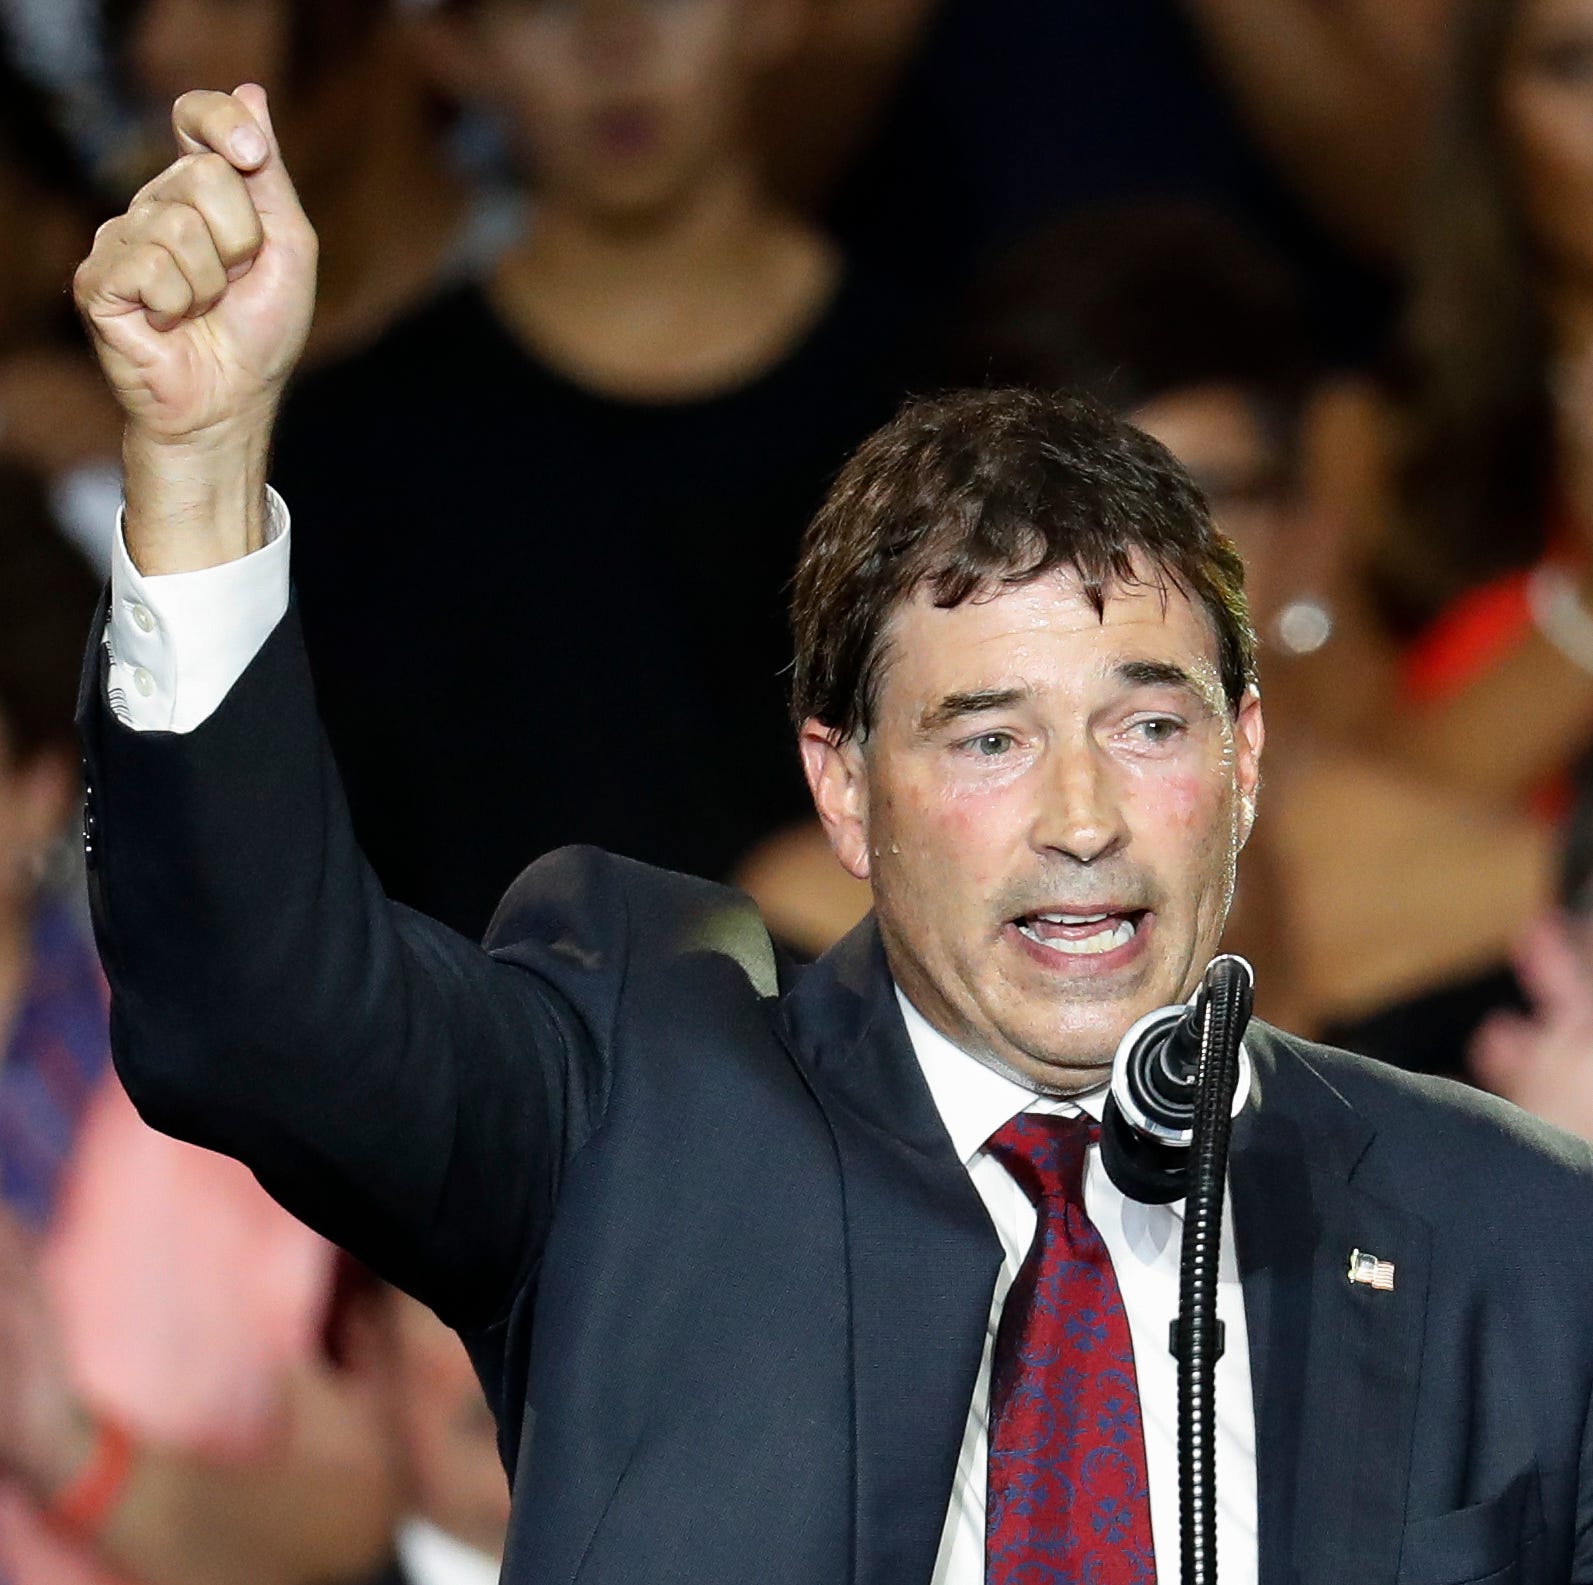 12th Congressional District Republican candidate Troy Balderson speaks during a rally with President Donald Trump, Saturday, Aug. 4, 2018, in Lewis Center, Ohio.